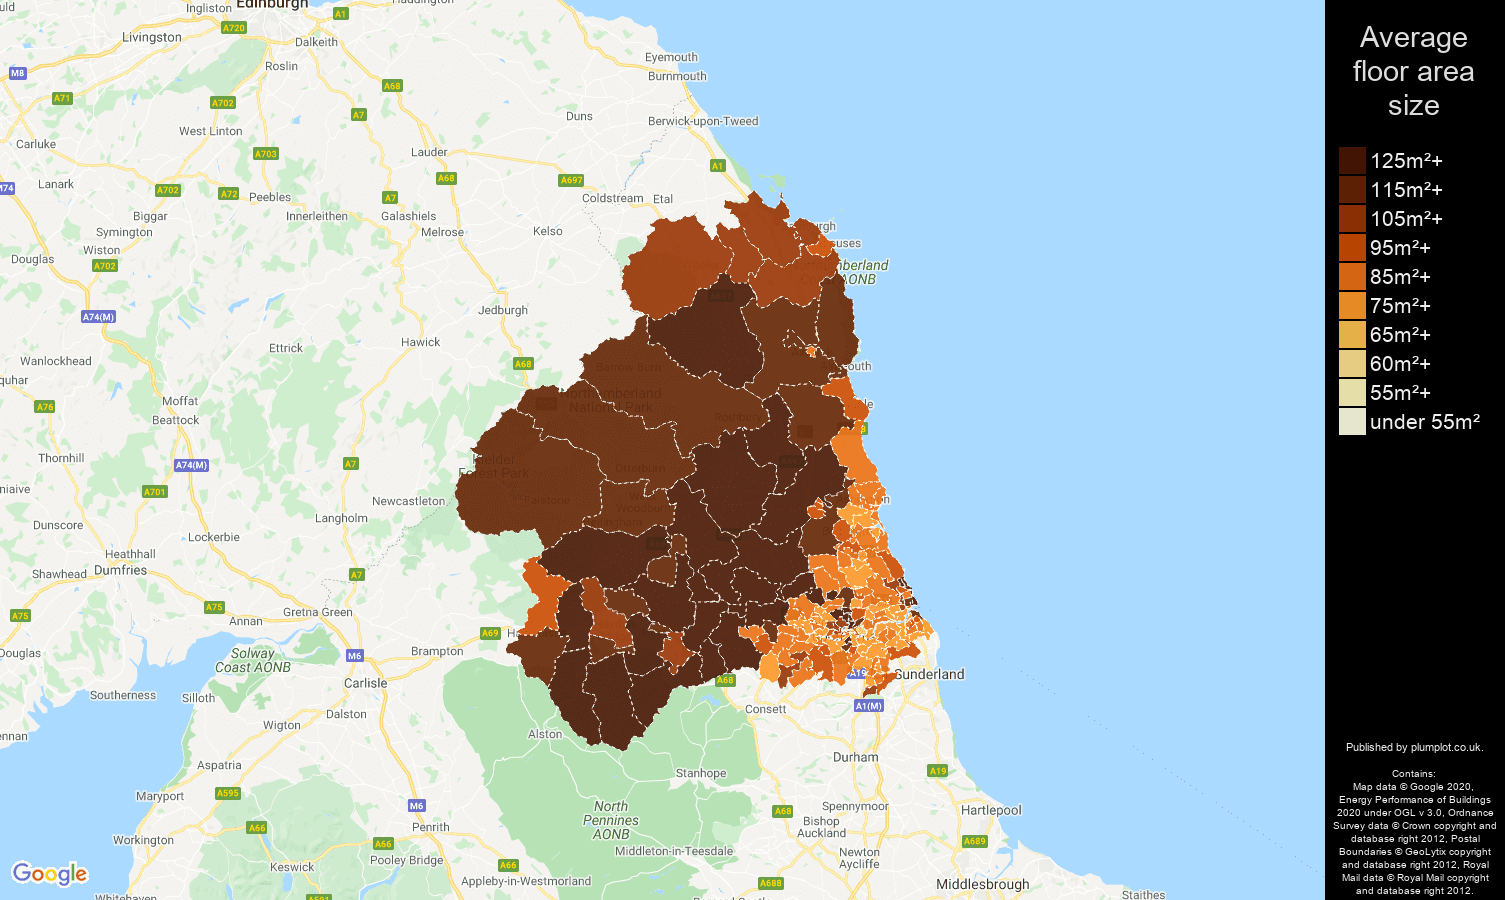 Newcastle upon Tyne map of average floor area size of houses